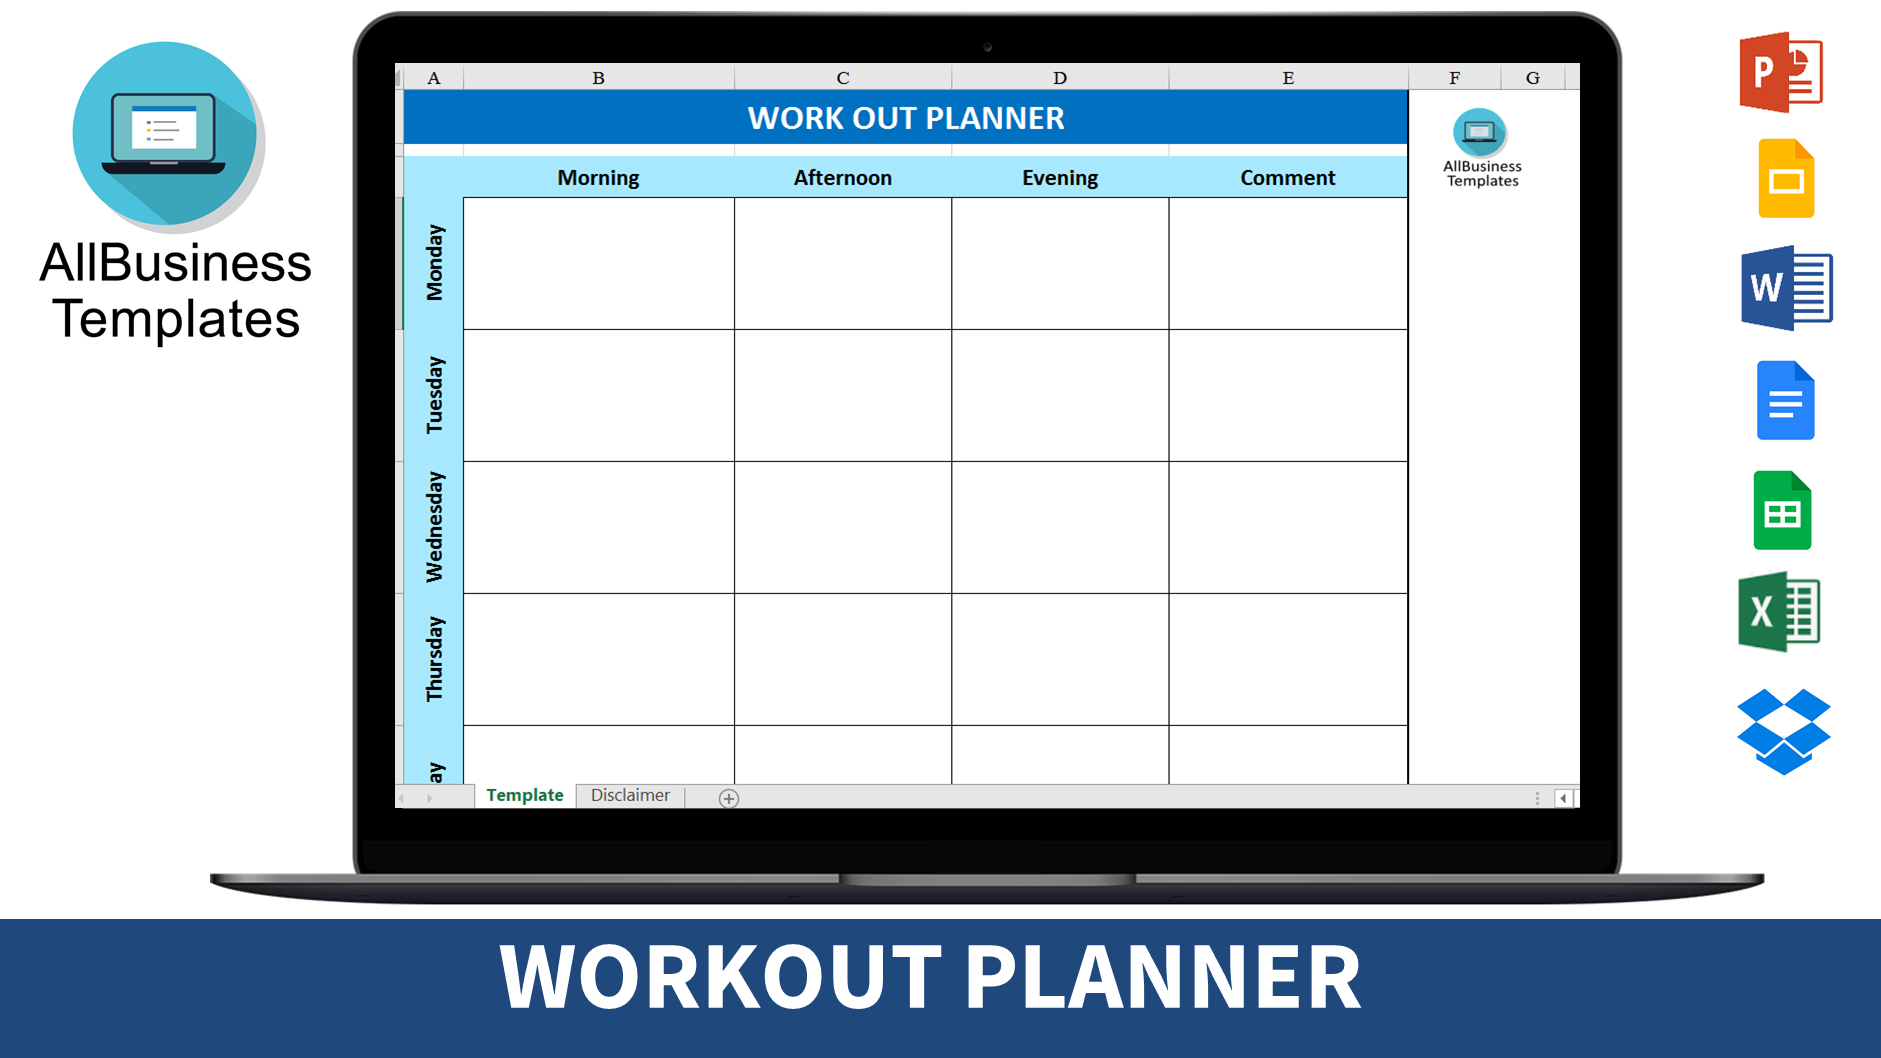 Workout Planner main image